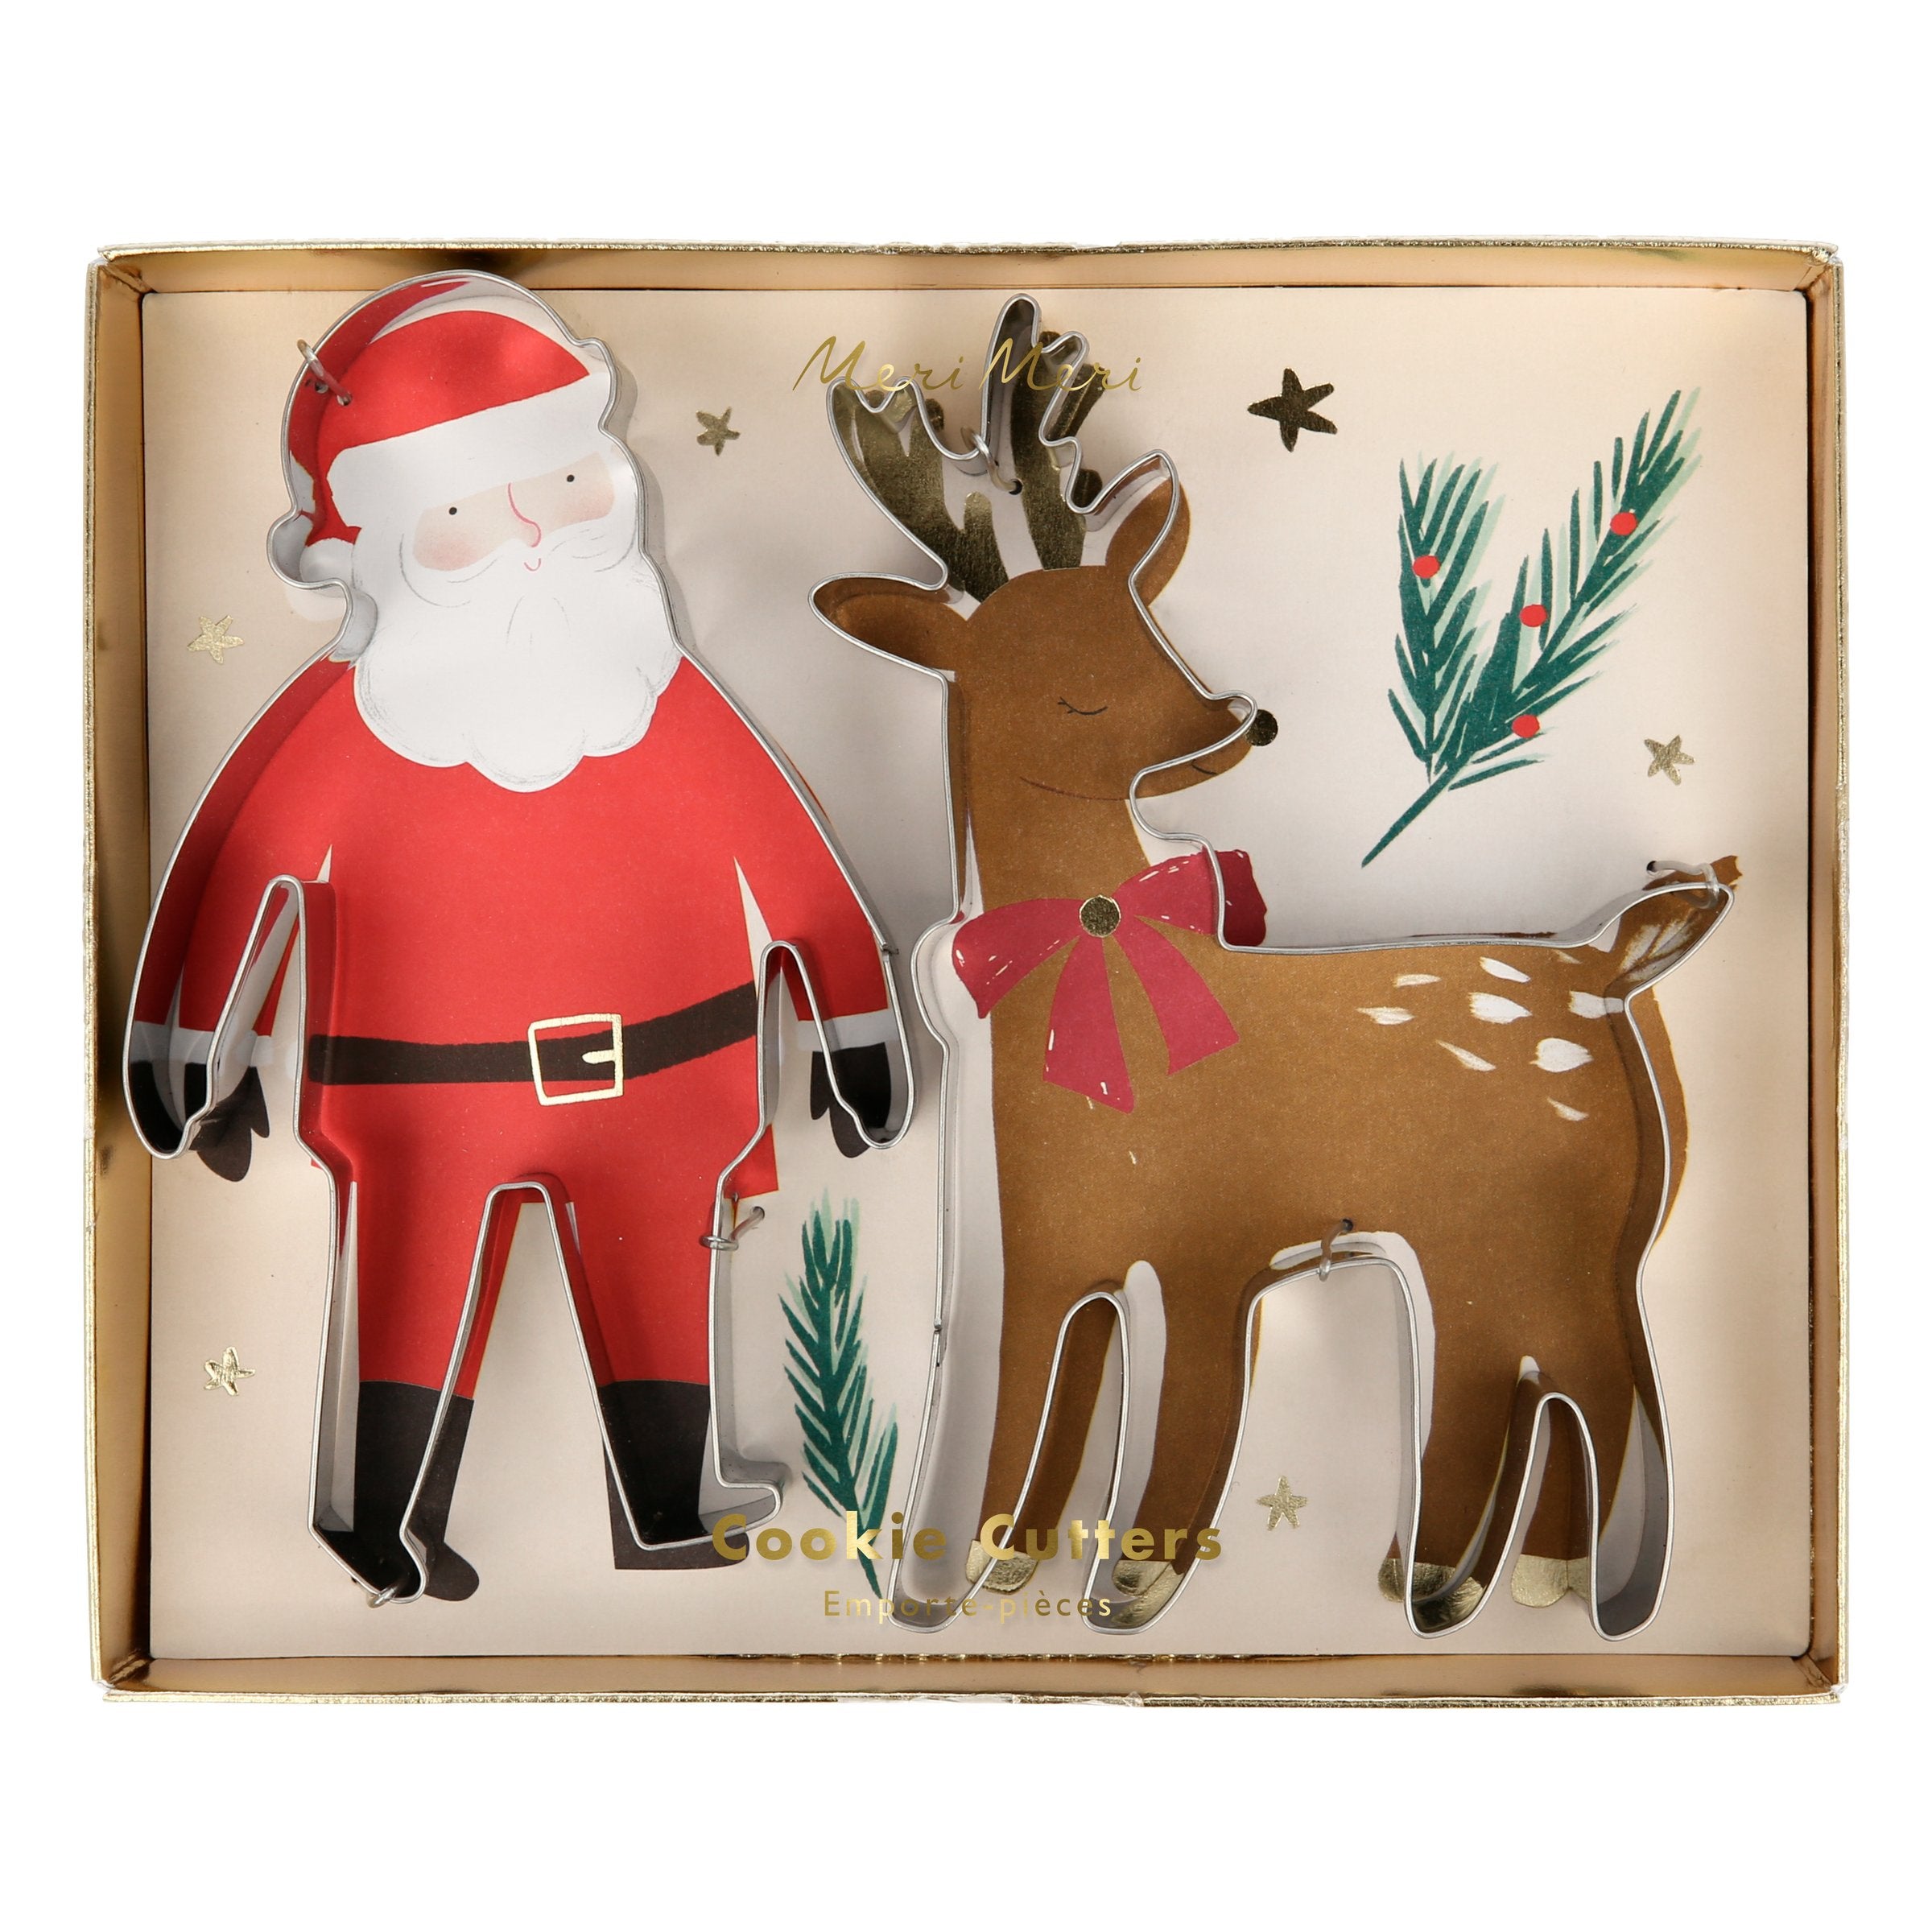 These Santa and reindeer cookie cutters are crafted from stainless steel.